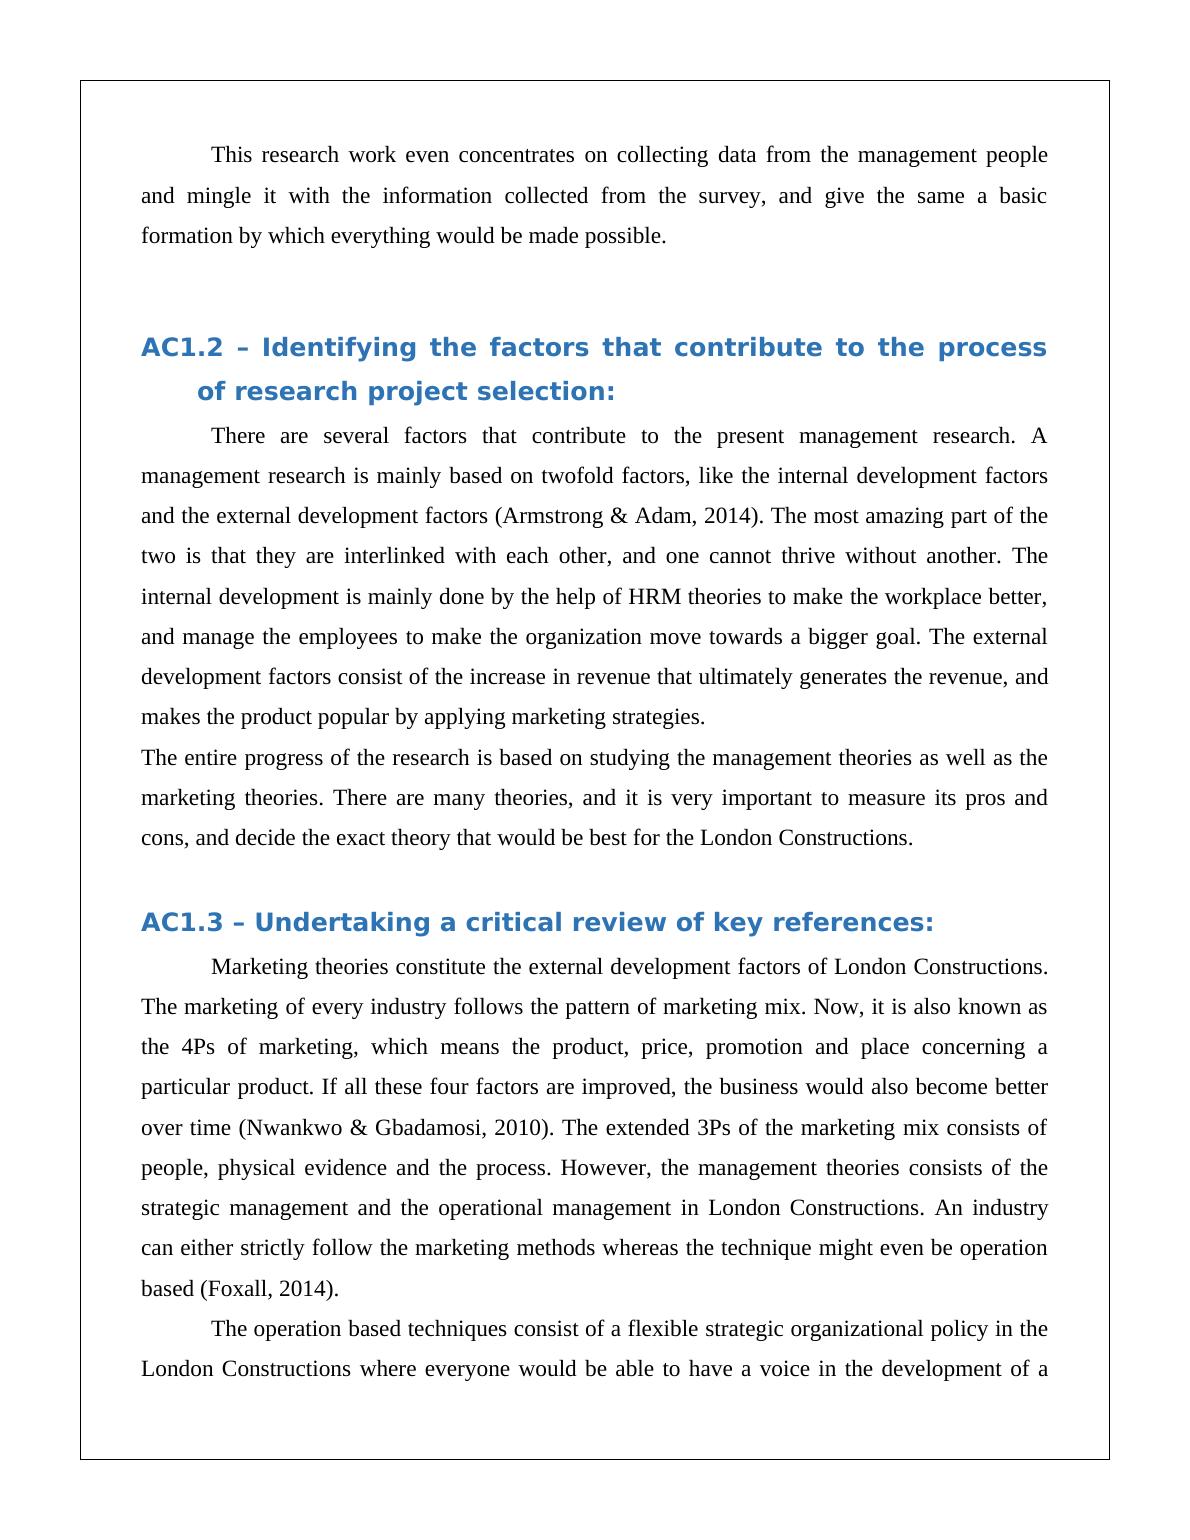 LO1: Formulation and Implementation of the Research Project 6_3